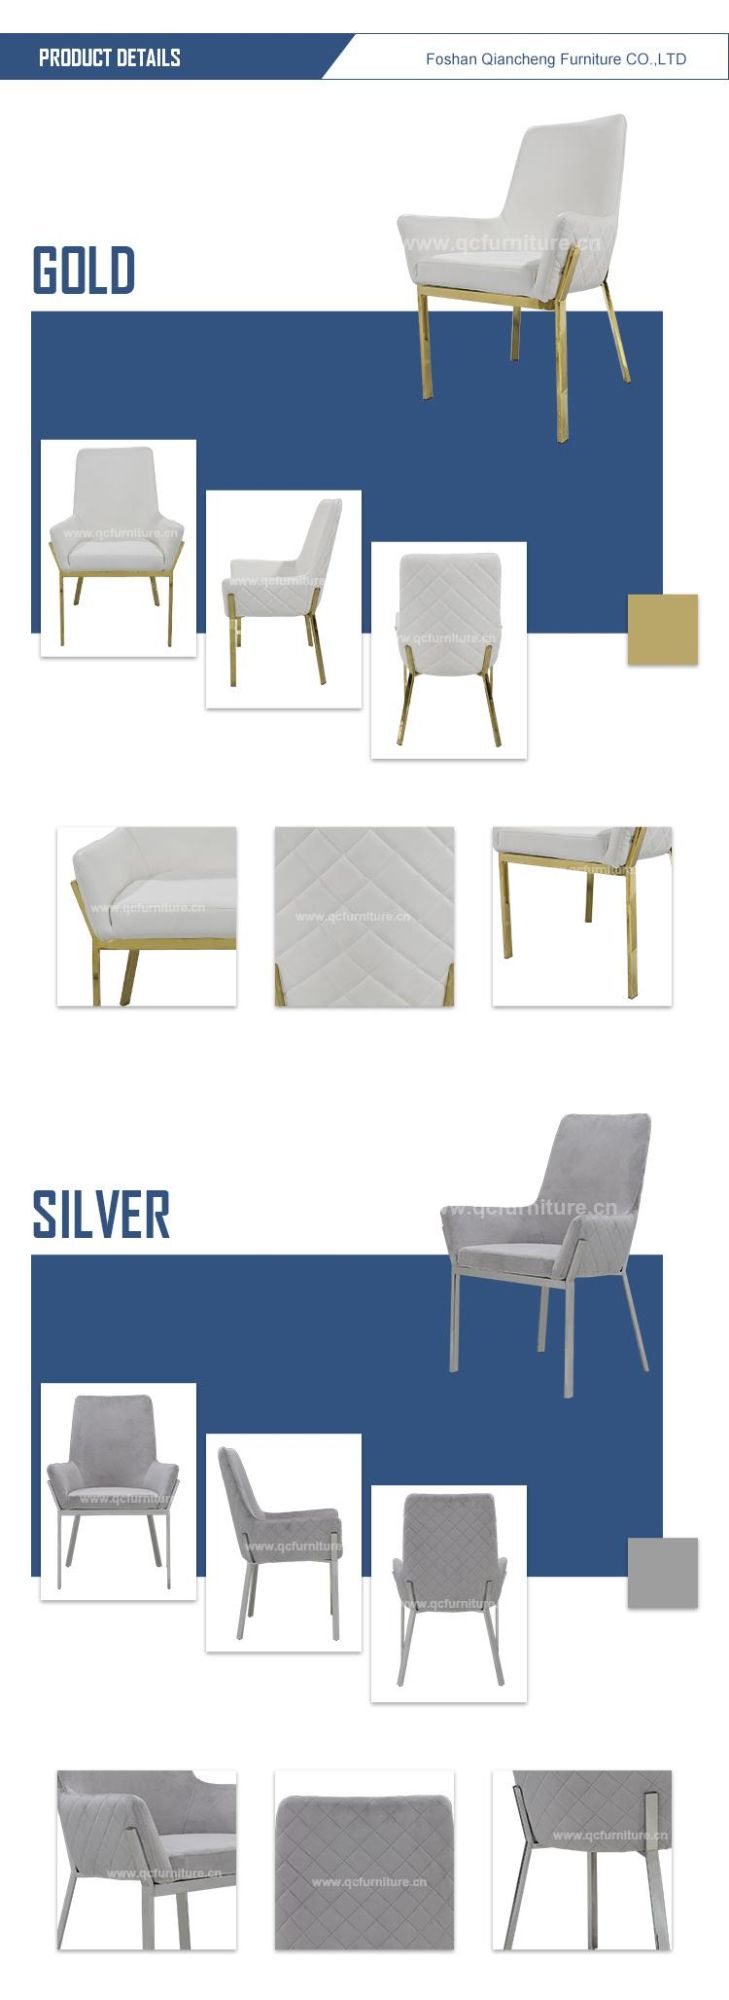 Wholesale Modern Comfortable Restaurant Golden Dining Chair Stainless Steel with Armrest